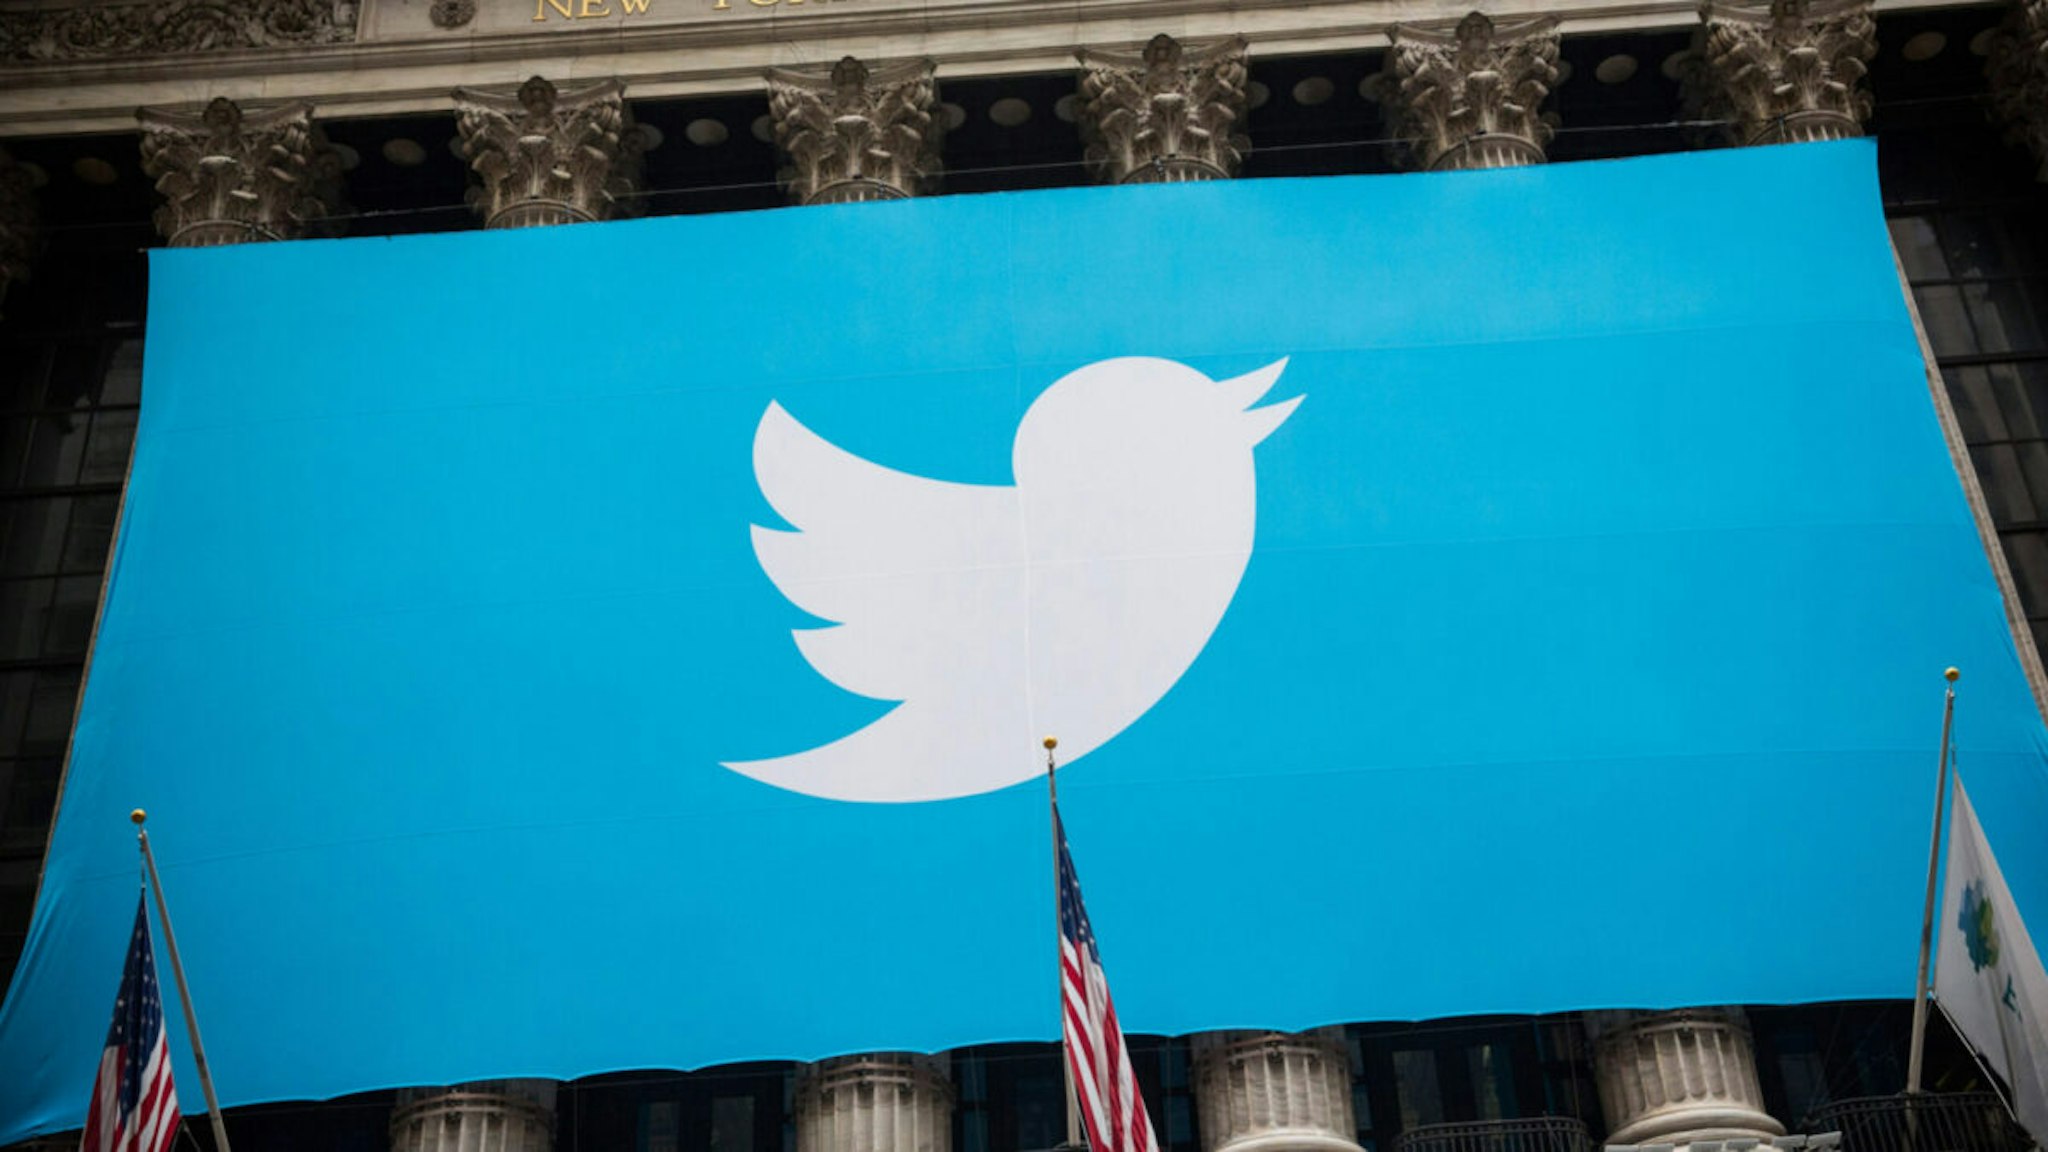 The Twitter logo is displayed on a banner outside the New York Stock Exchange (NYSE) on November 7, 2013 in New York City.